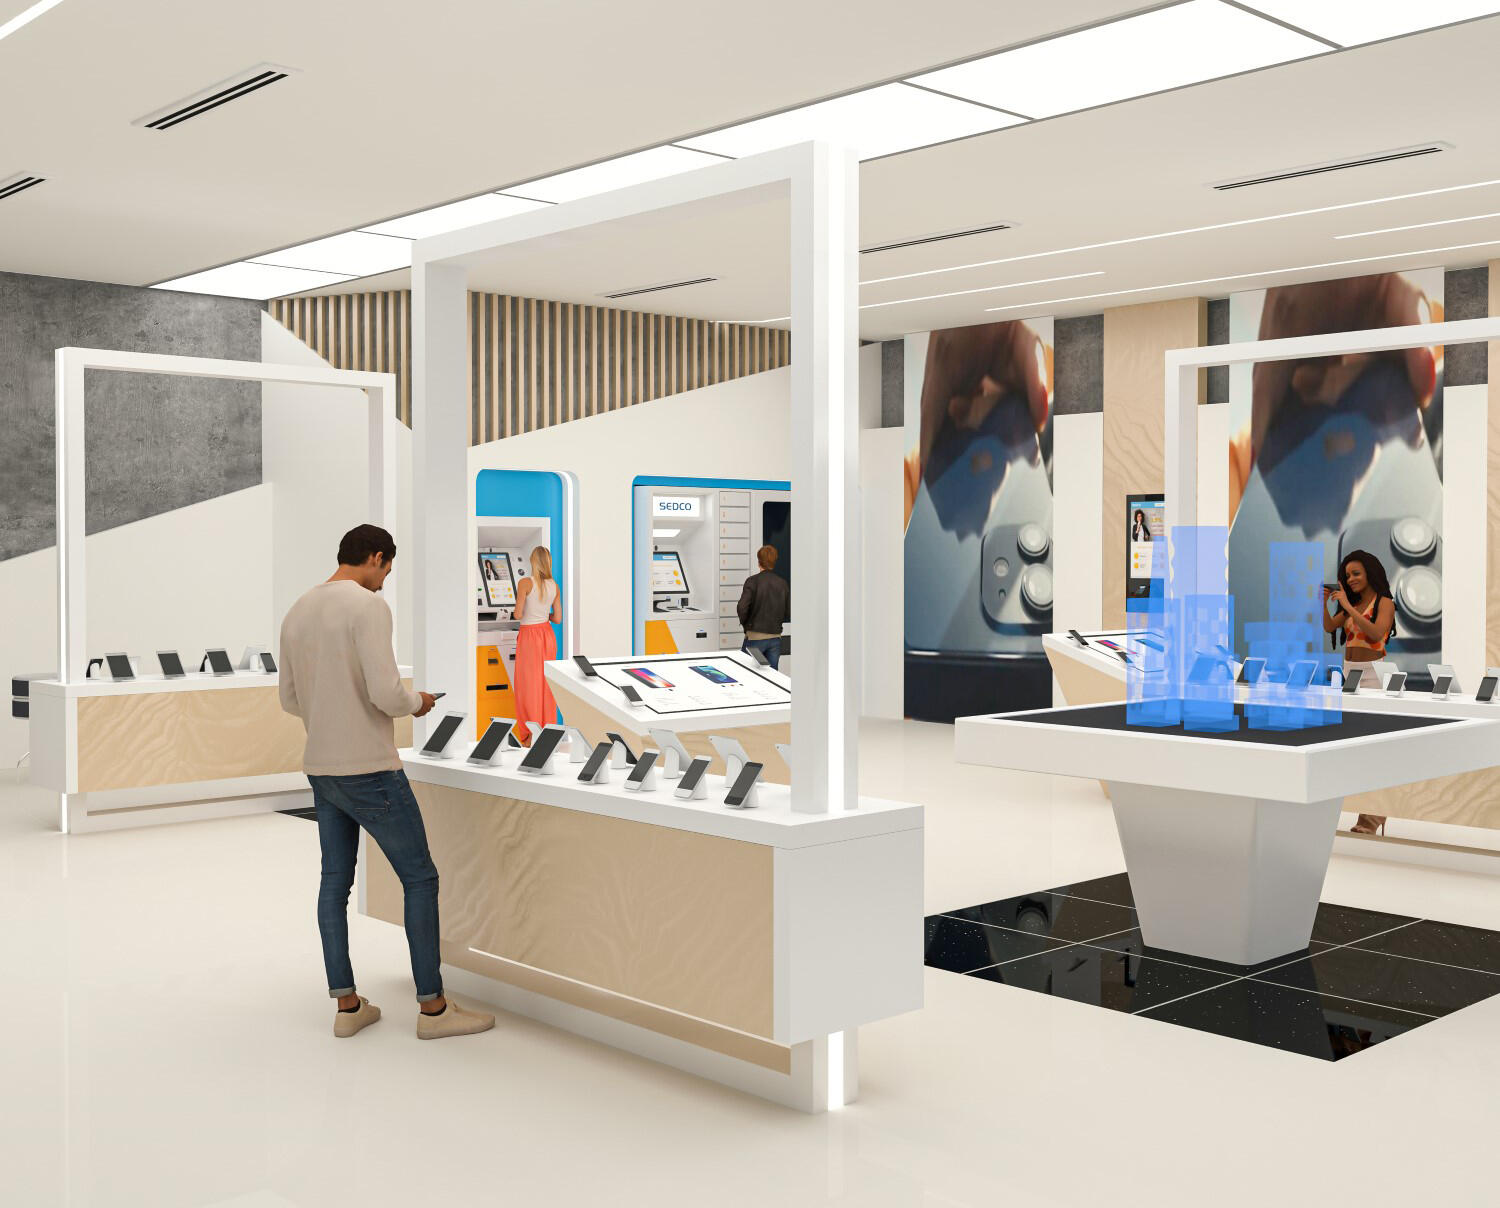 The future of customer experience in telecom stores